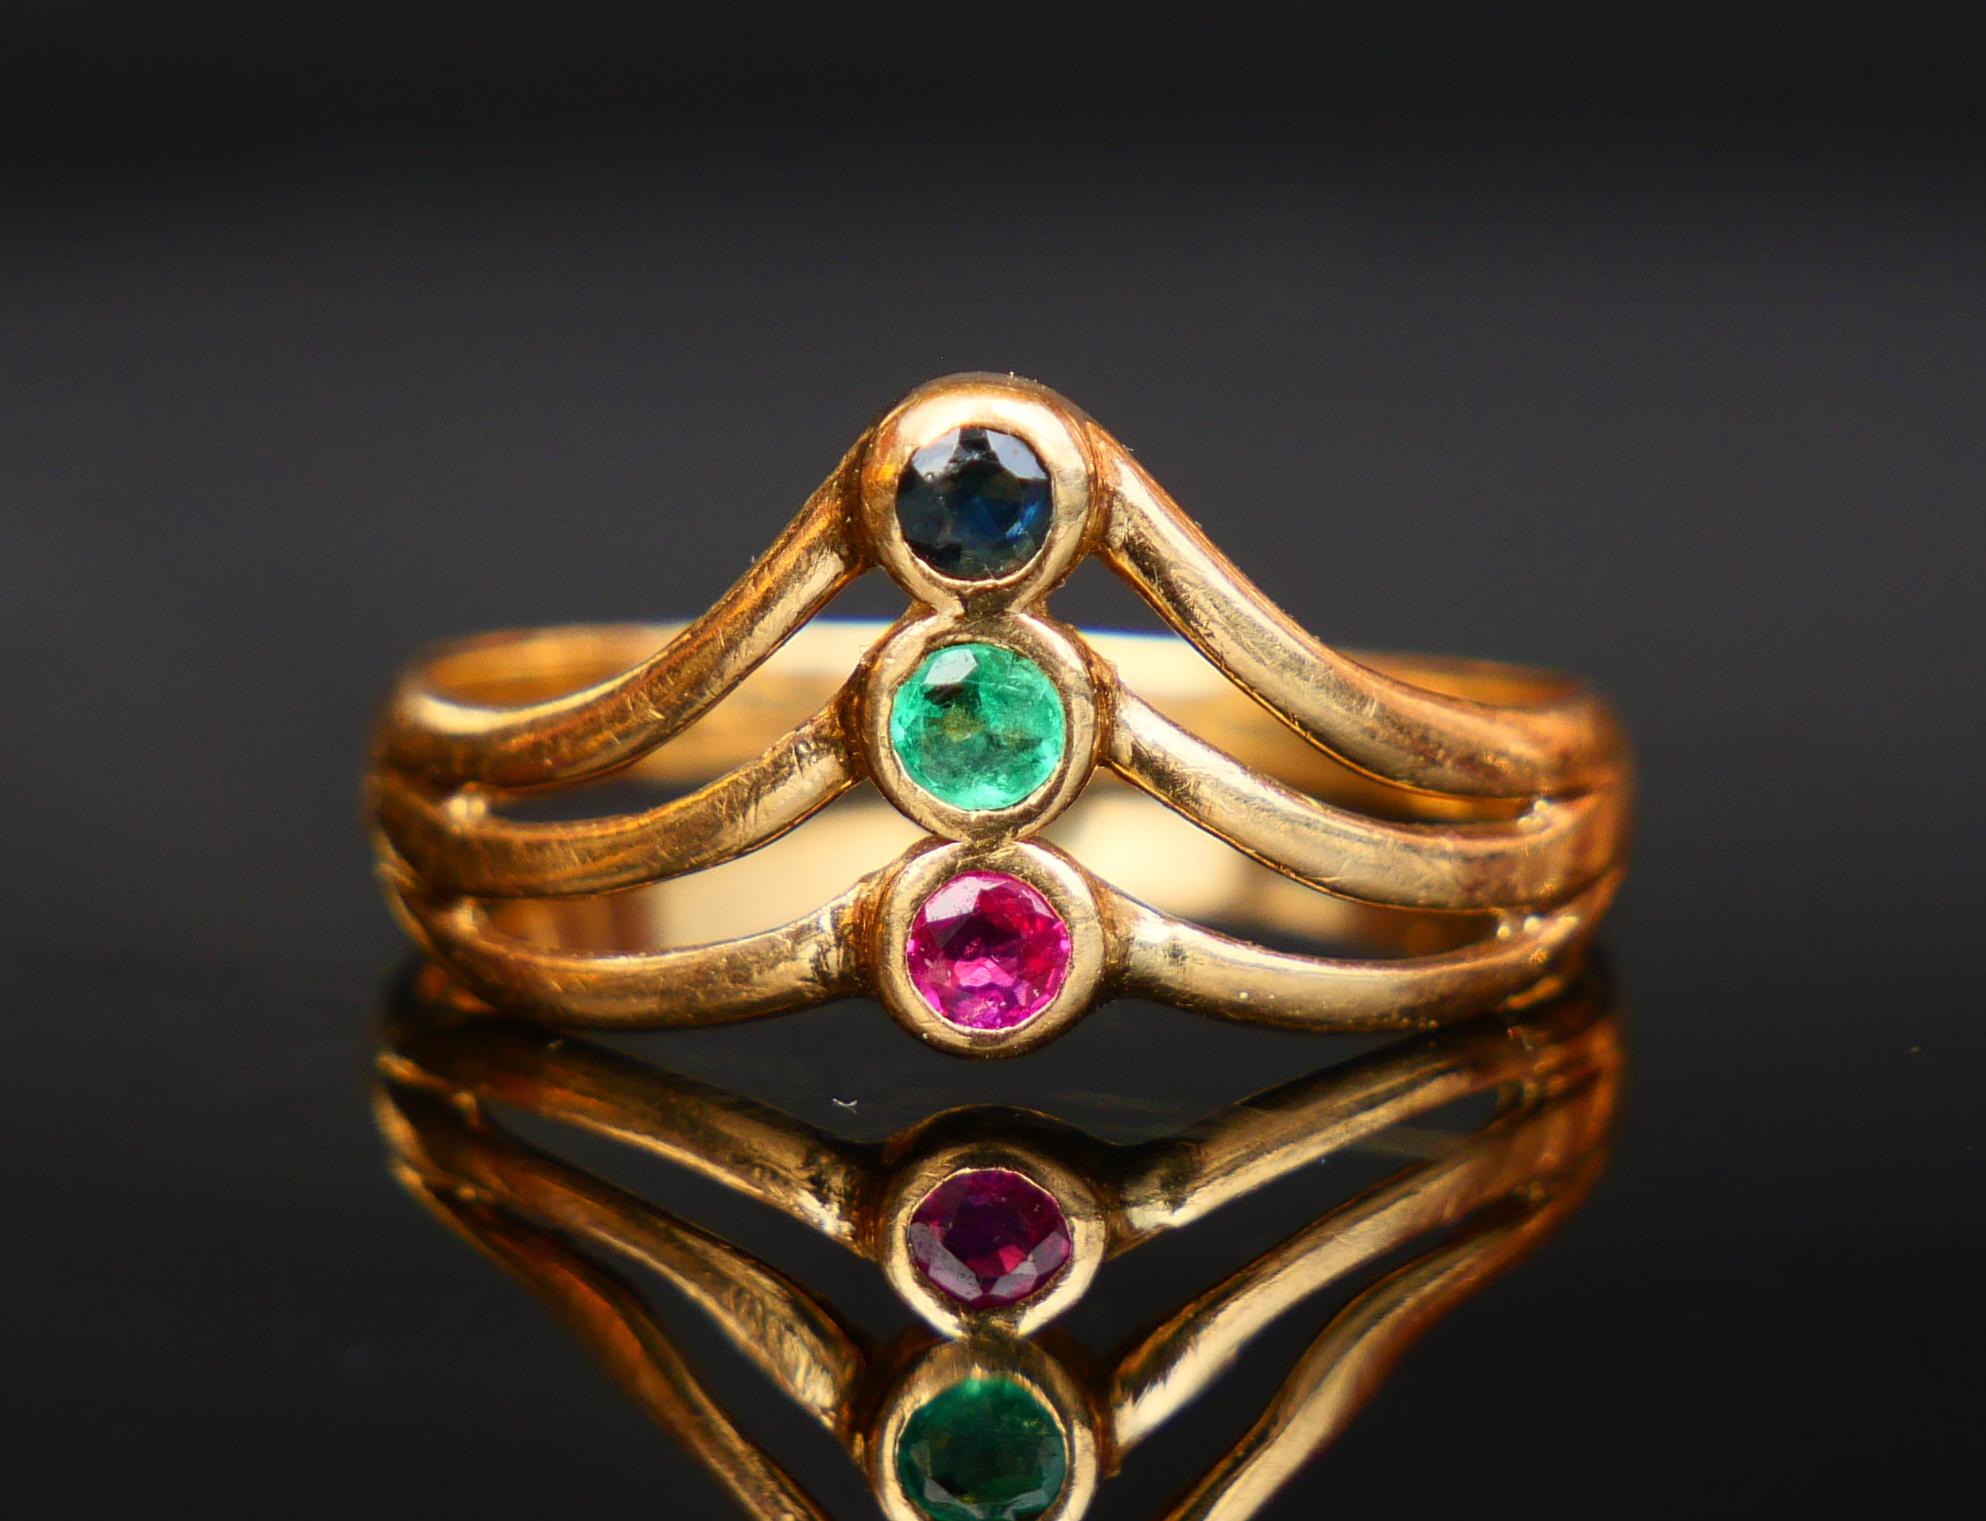 Ring for every day in solid 18K Yellow Gold decorated with 3 natural stones : Red Ruby, Green Emerald and Blue Sapphire of old European diamond cut Ø 2.5 mm / ca. 0.1 ct each . Total weight : ca. 0.3 ctw. All stones with open backs.

Crown is 9.5 mm